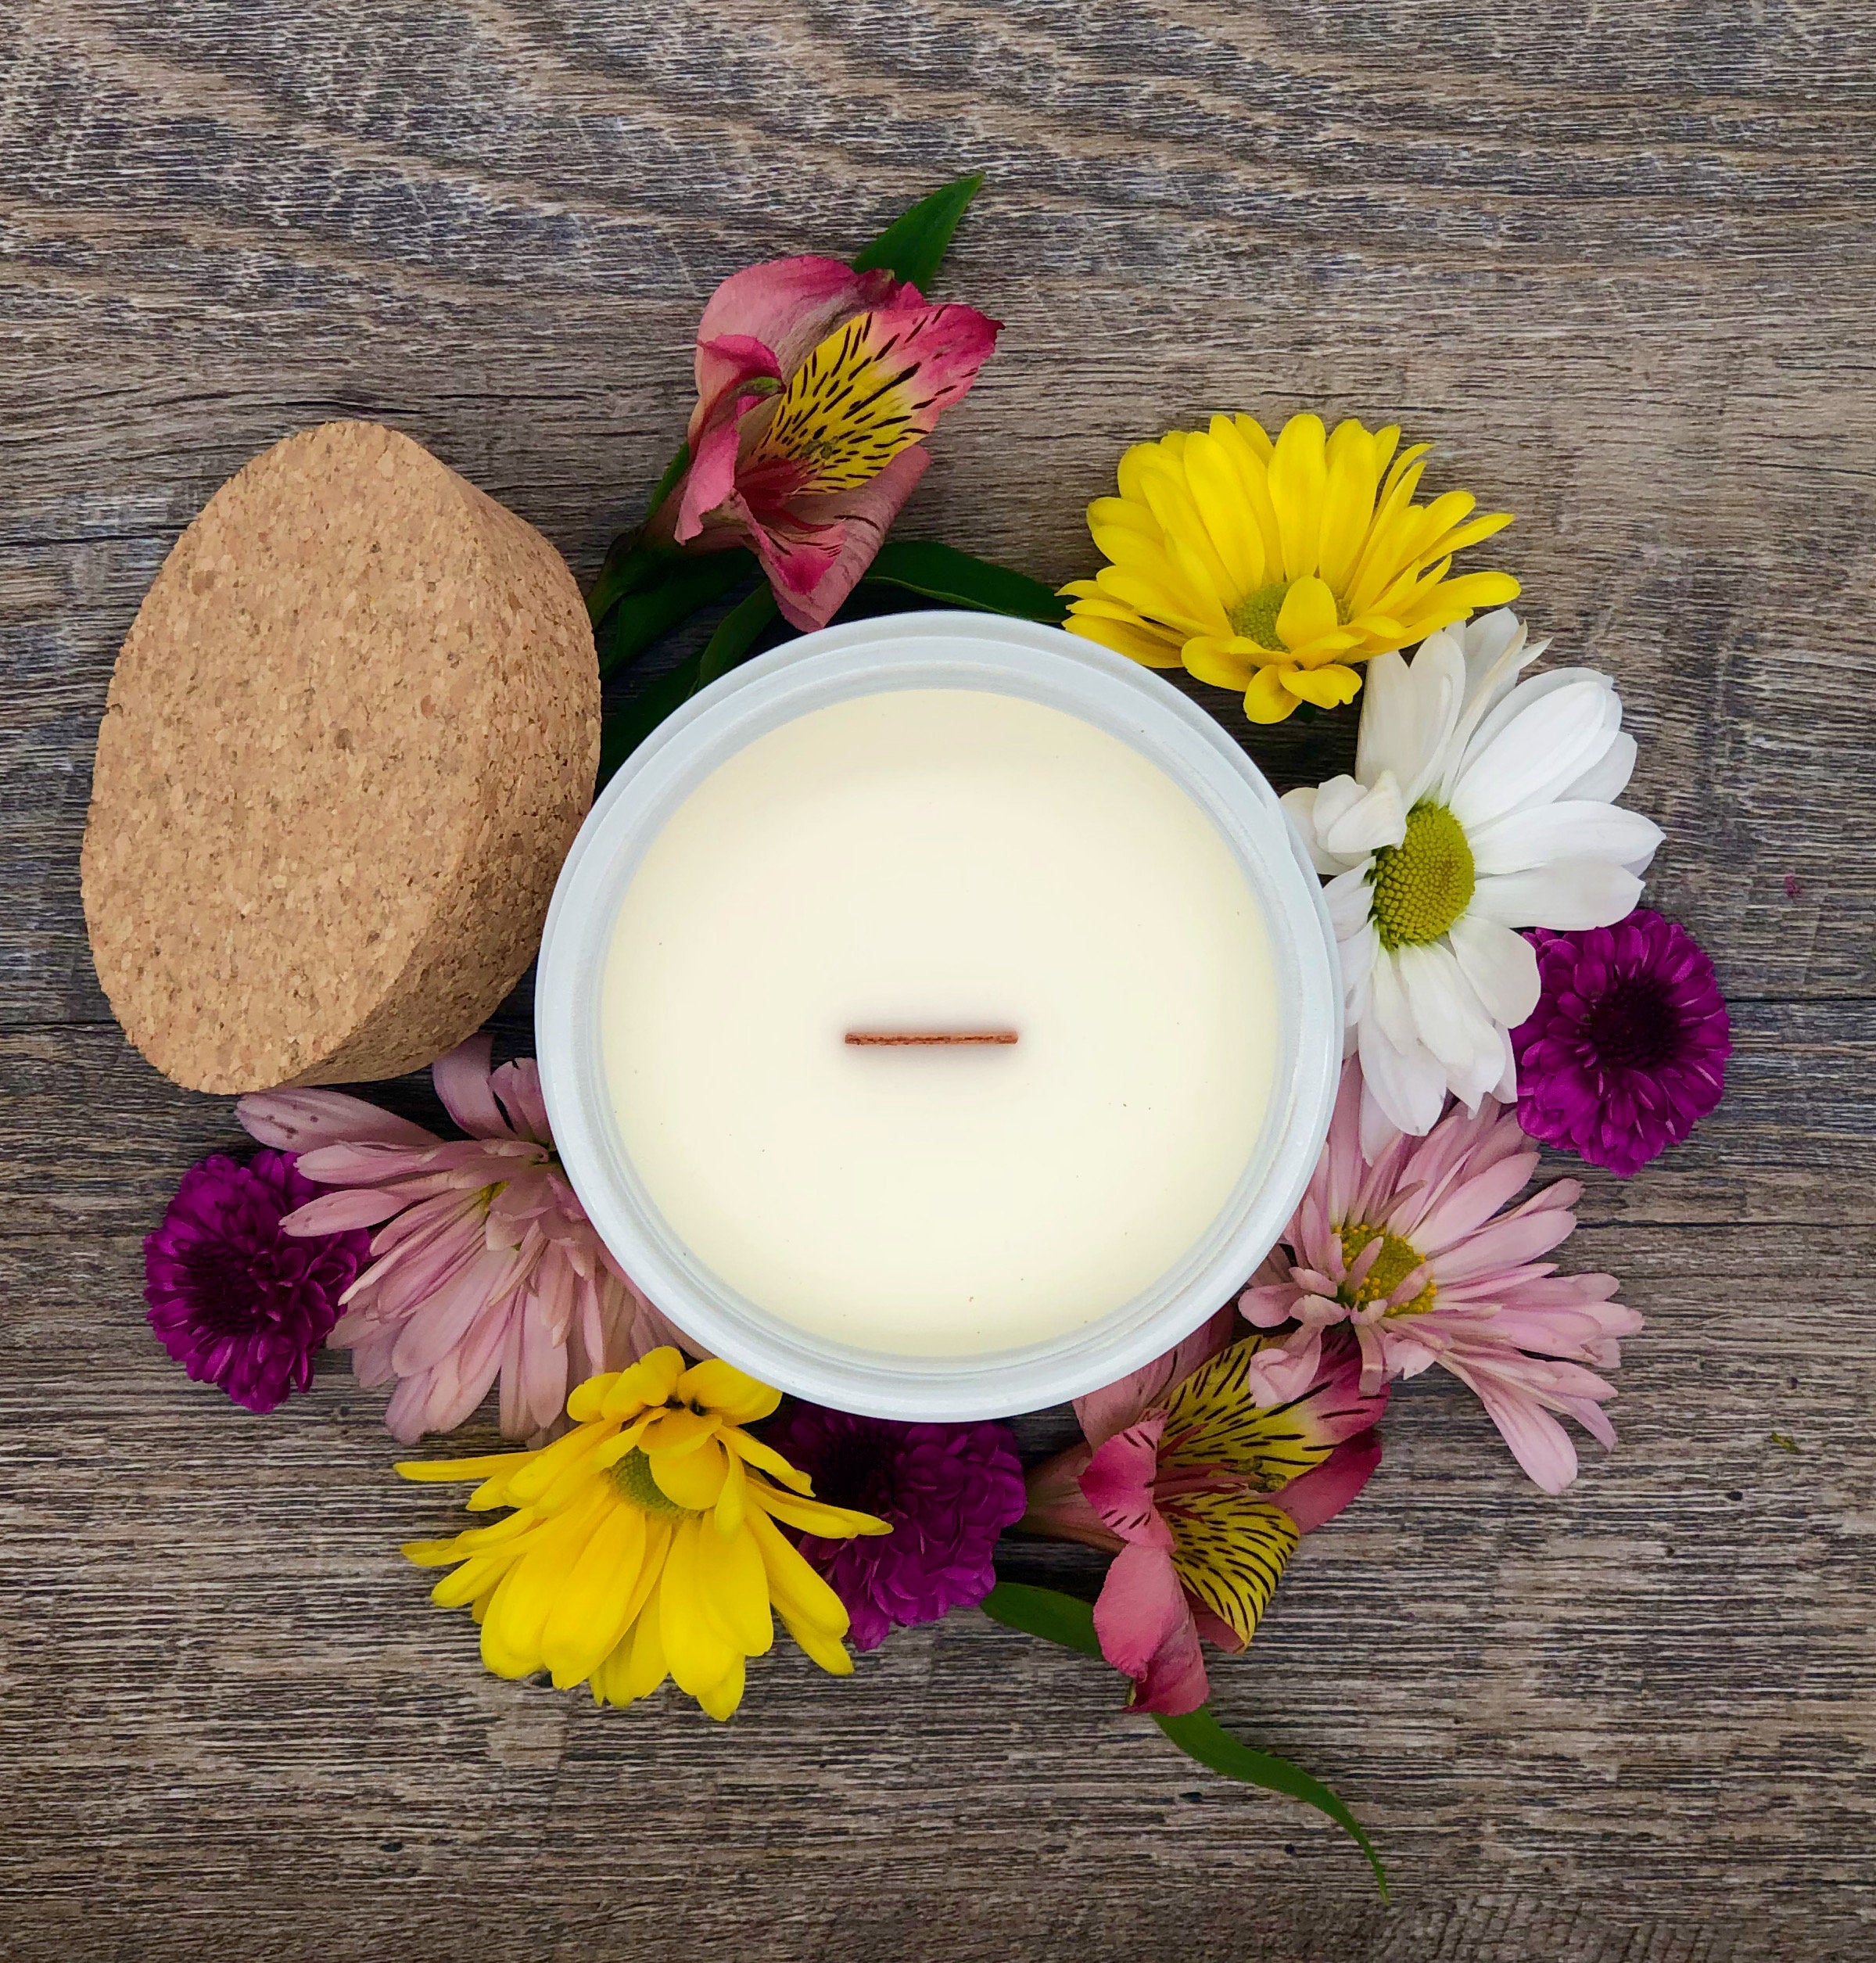 SPRING FLING | Red Currant + Kumquat  Scented Soy Candle | 12oz Wood WIck Candle | Tropical Candle | Minimalist Candle | Spring Candle Gift